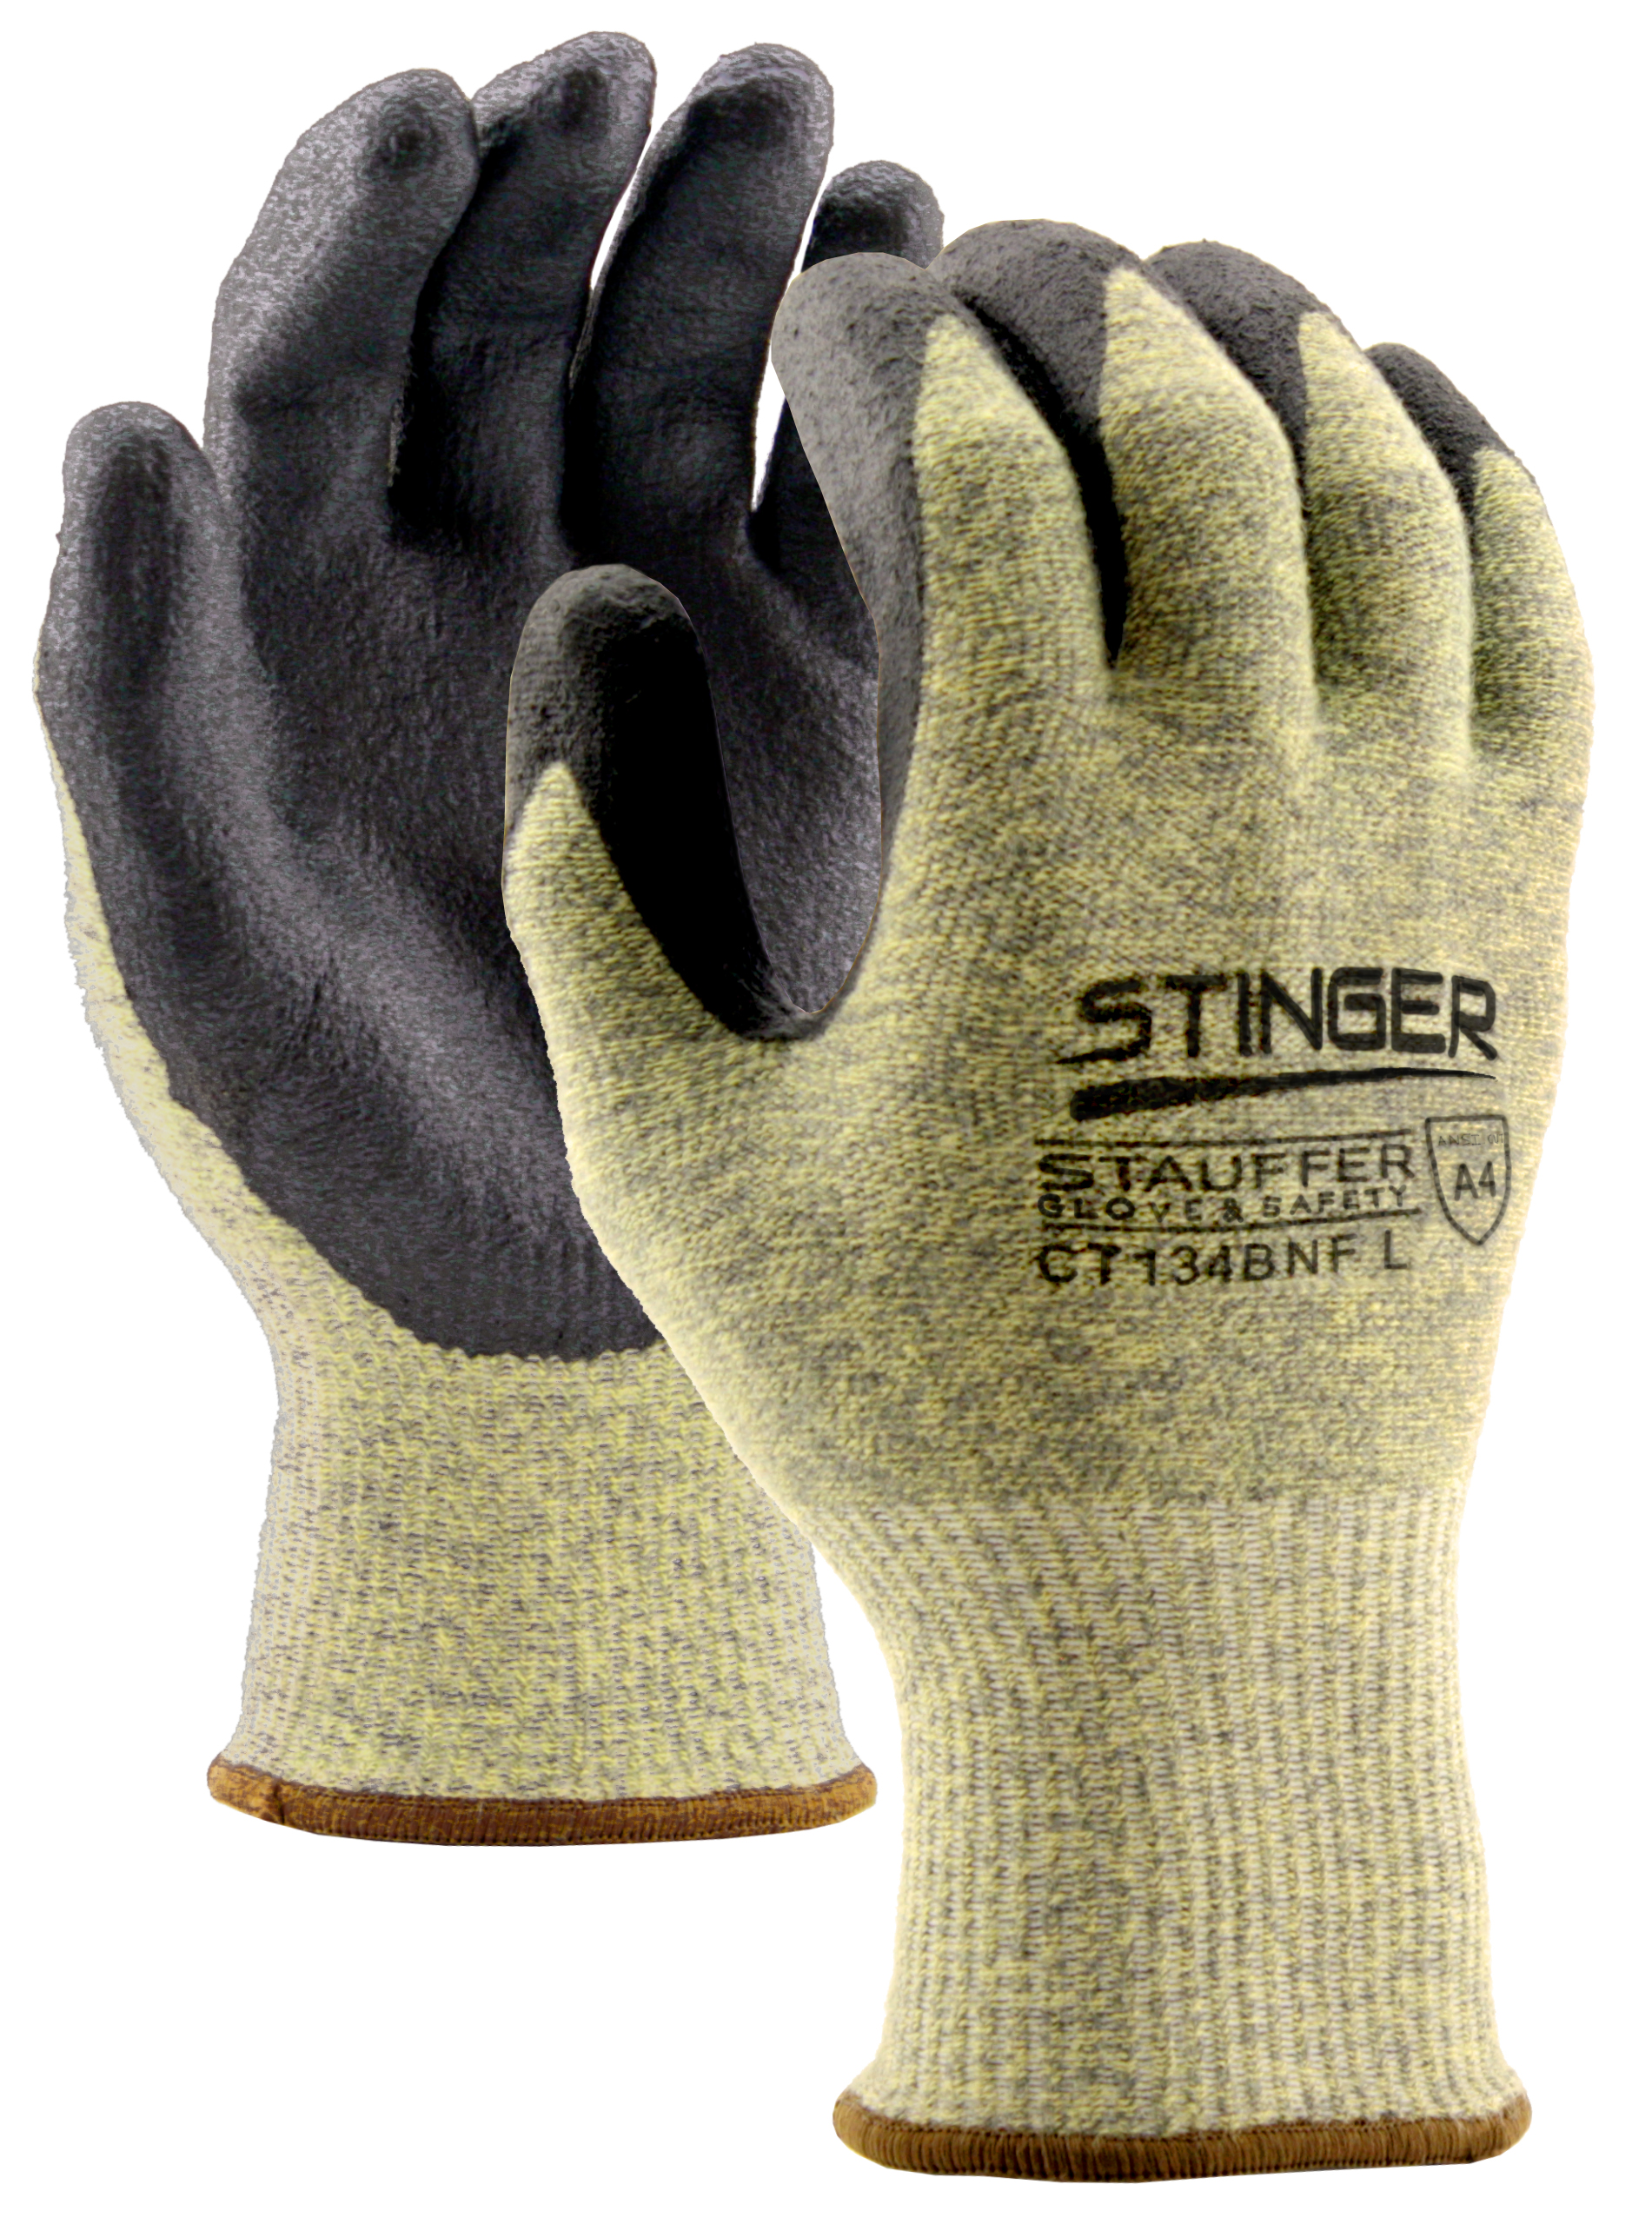 Stauffer Glove & Safety CT134BNF L - Stinger Cut Resistant Glove with  Nitrile Foam Coating, Cut Level A4 - Large